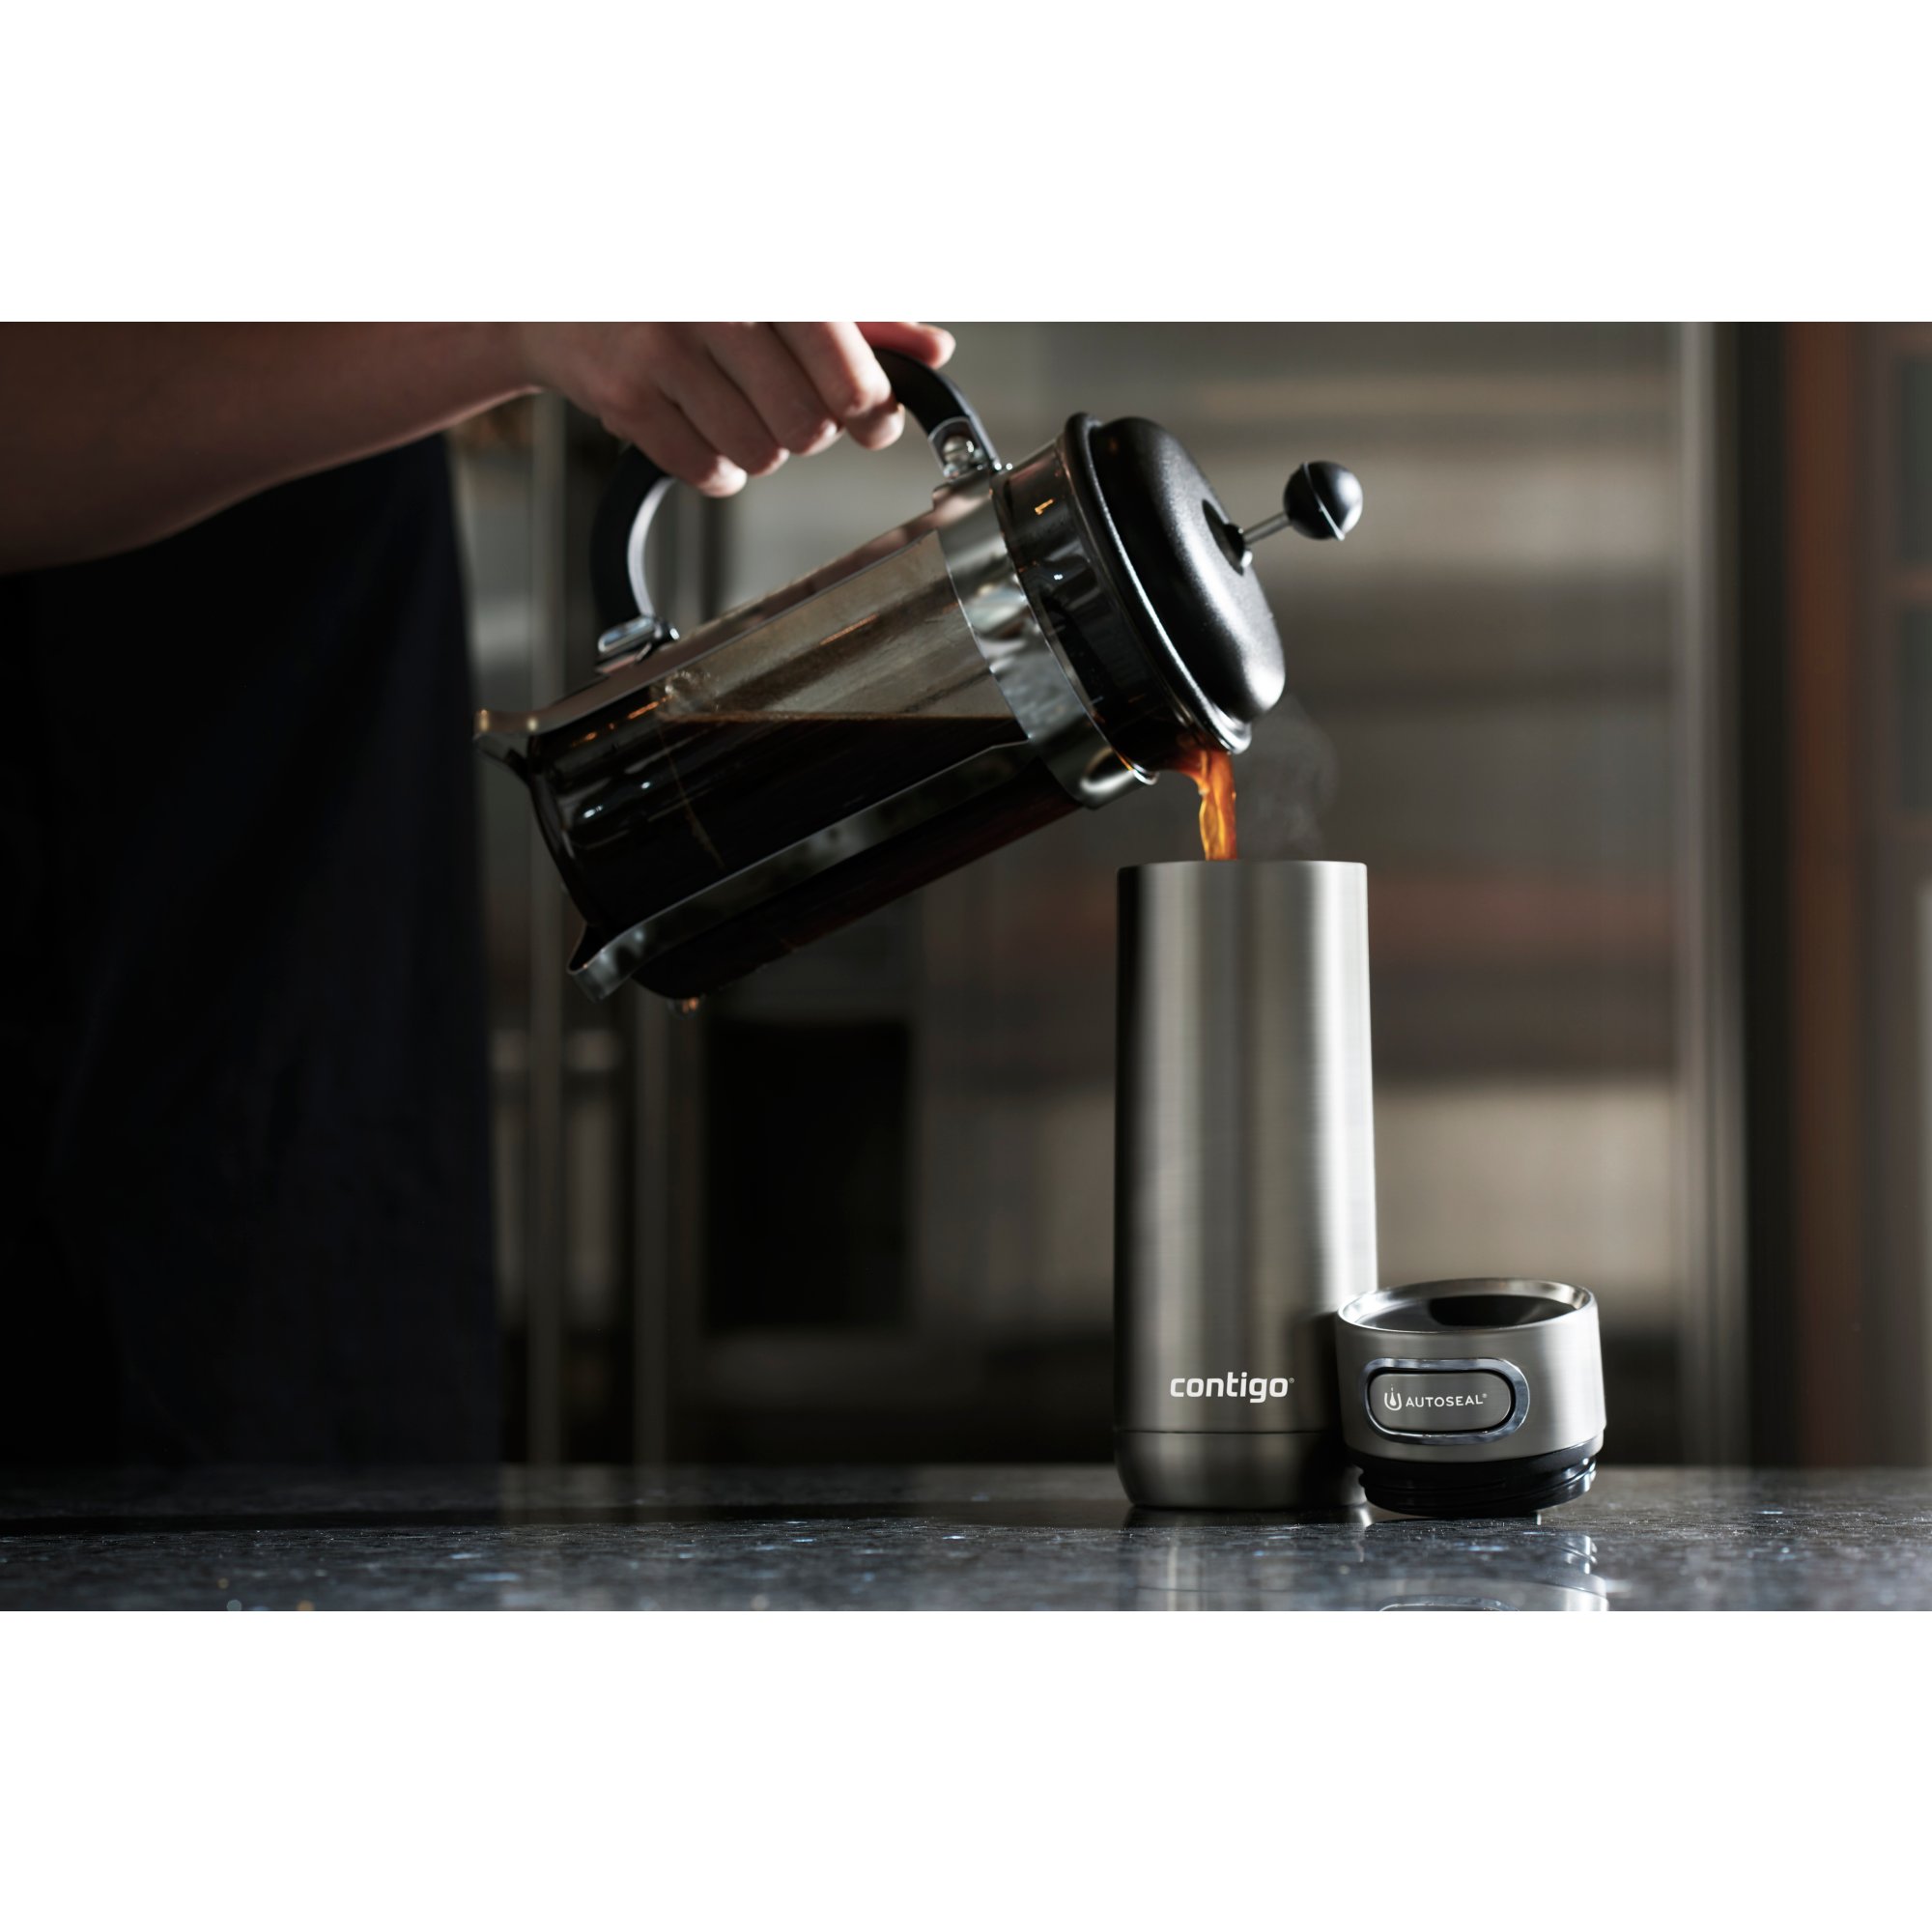 https://s7d9.scene7.com/is/image/NewellRubbermaid/20a-SAP-contigo-luxe-thermal-autoseal-16oz-ss-kitchen-counter-lifestyle-v2?wid=2000&hei=2000